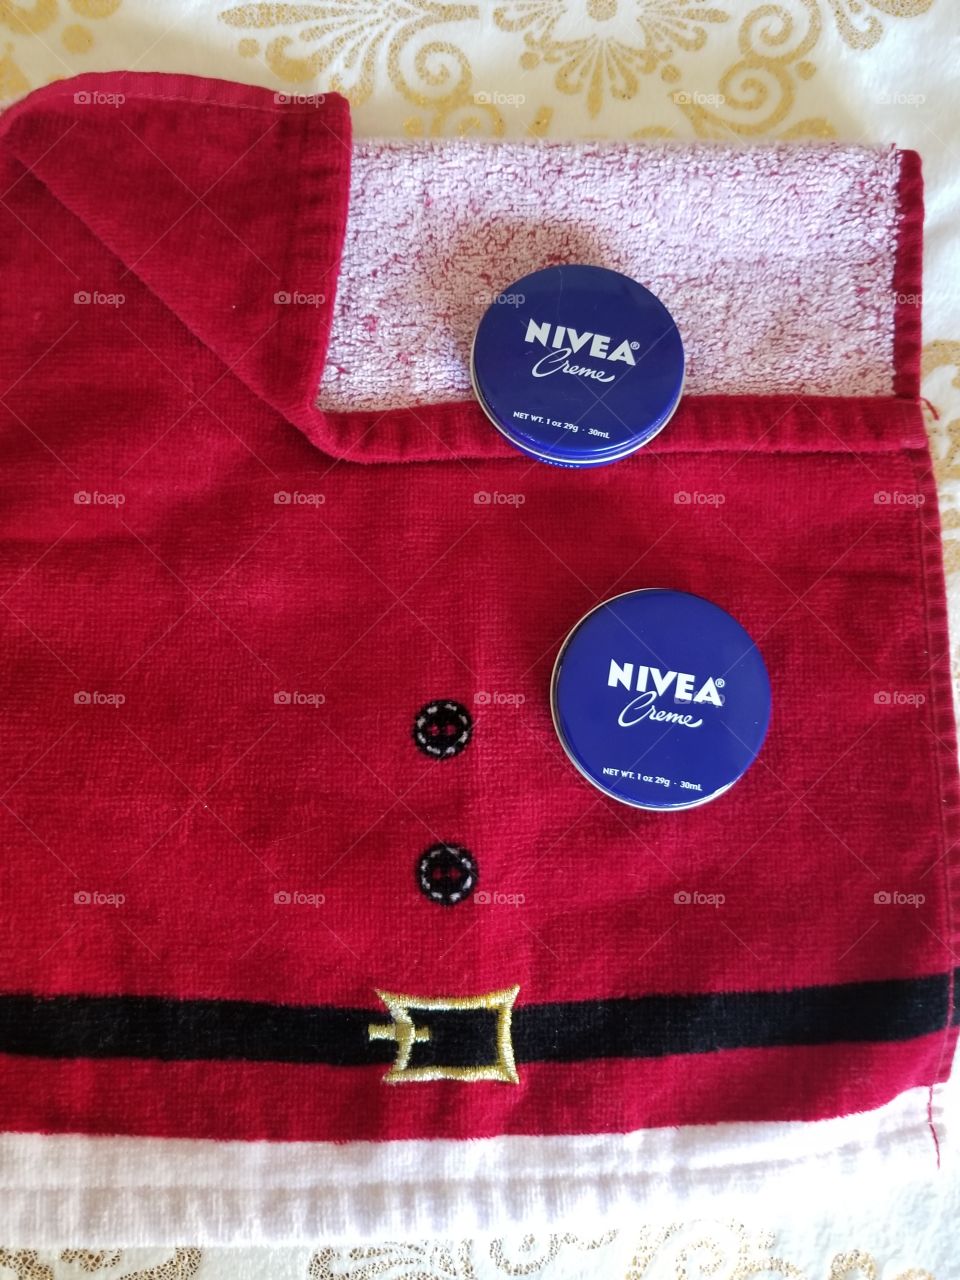 Your Beautiful Skin Only With Nivea